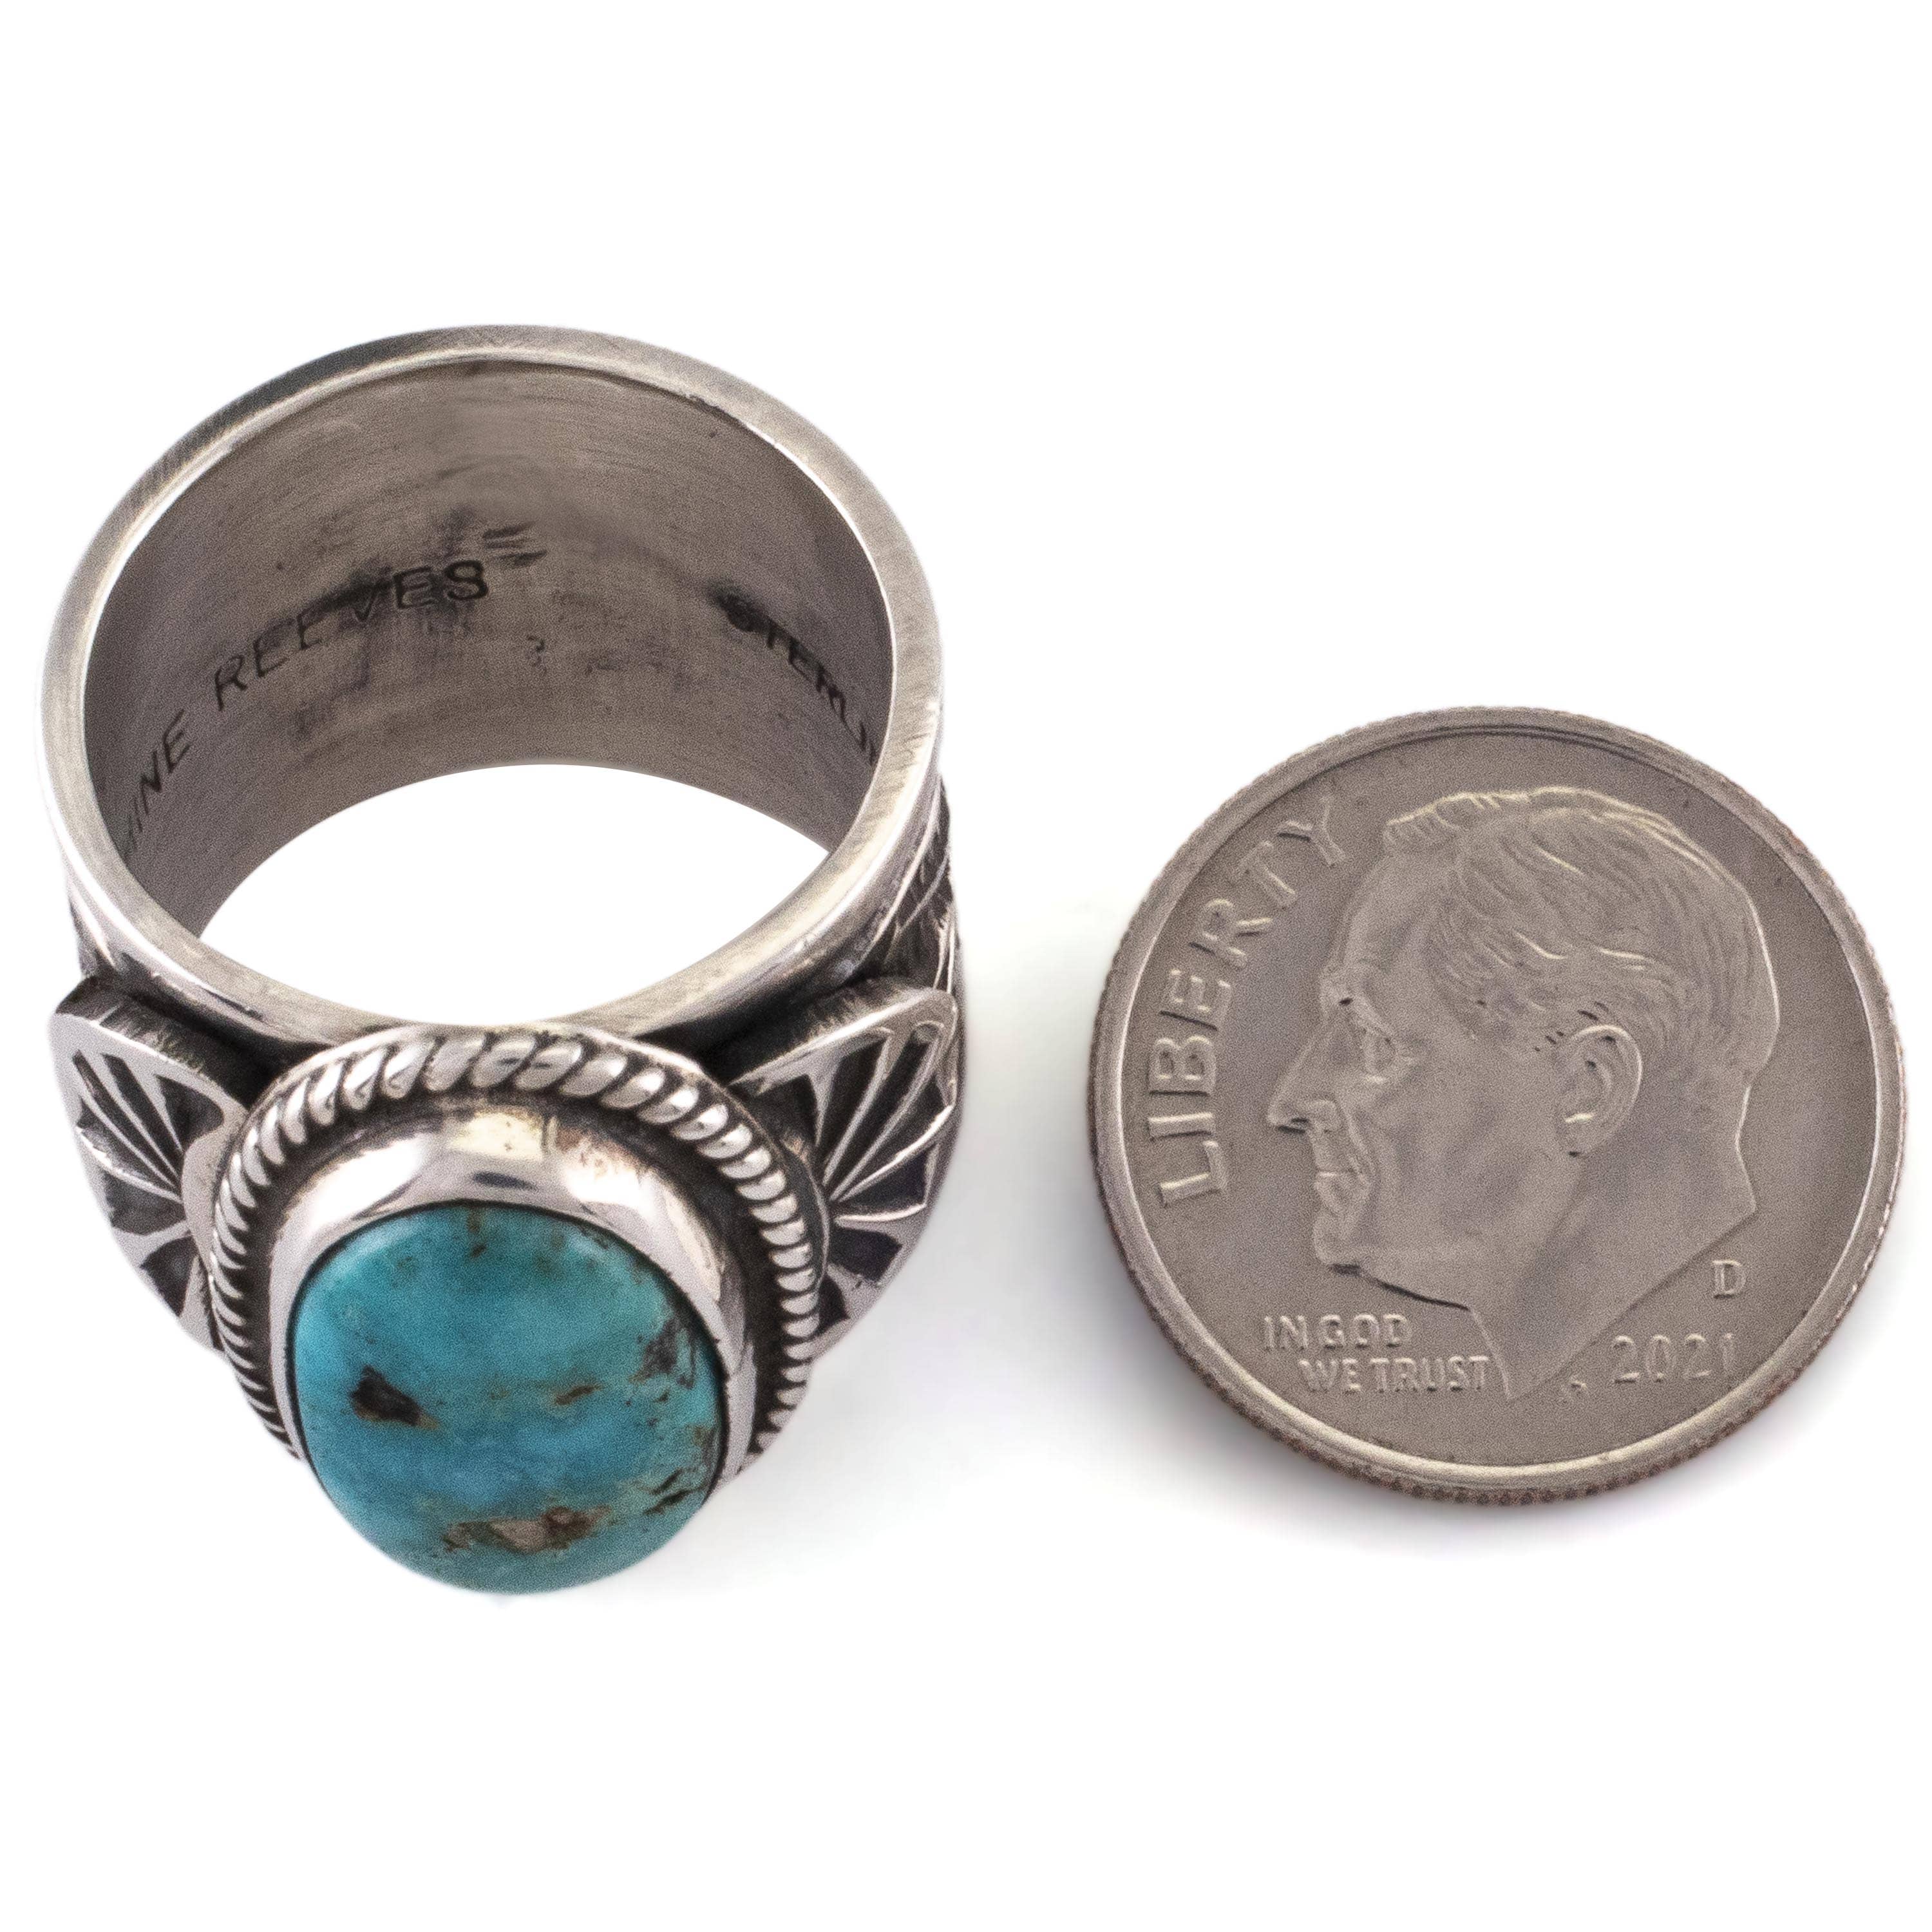 Kalifano Native American Jewelry 6 Sunshine Reeeves Navajo Sonoran Gold Turquoise USA Native American Made 925 Sterling Silver Ring NAR900.020.6